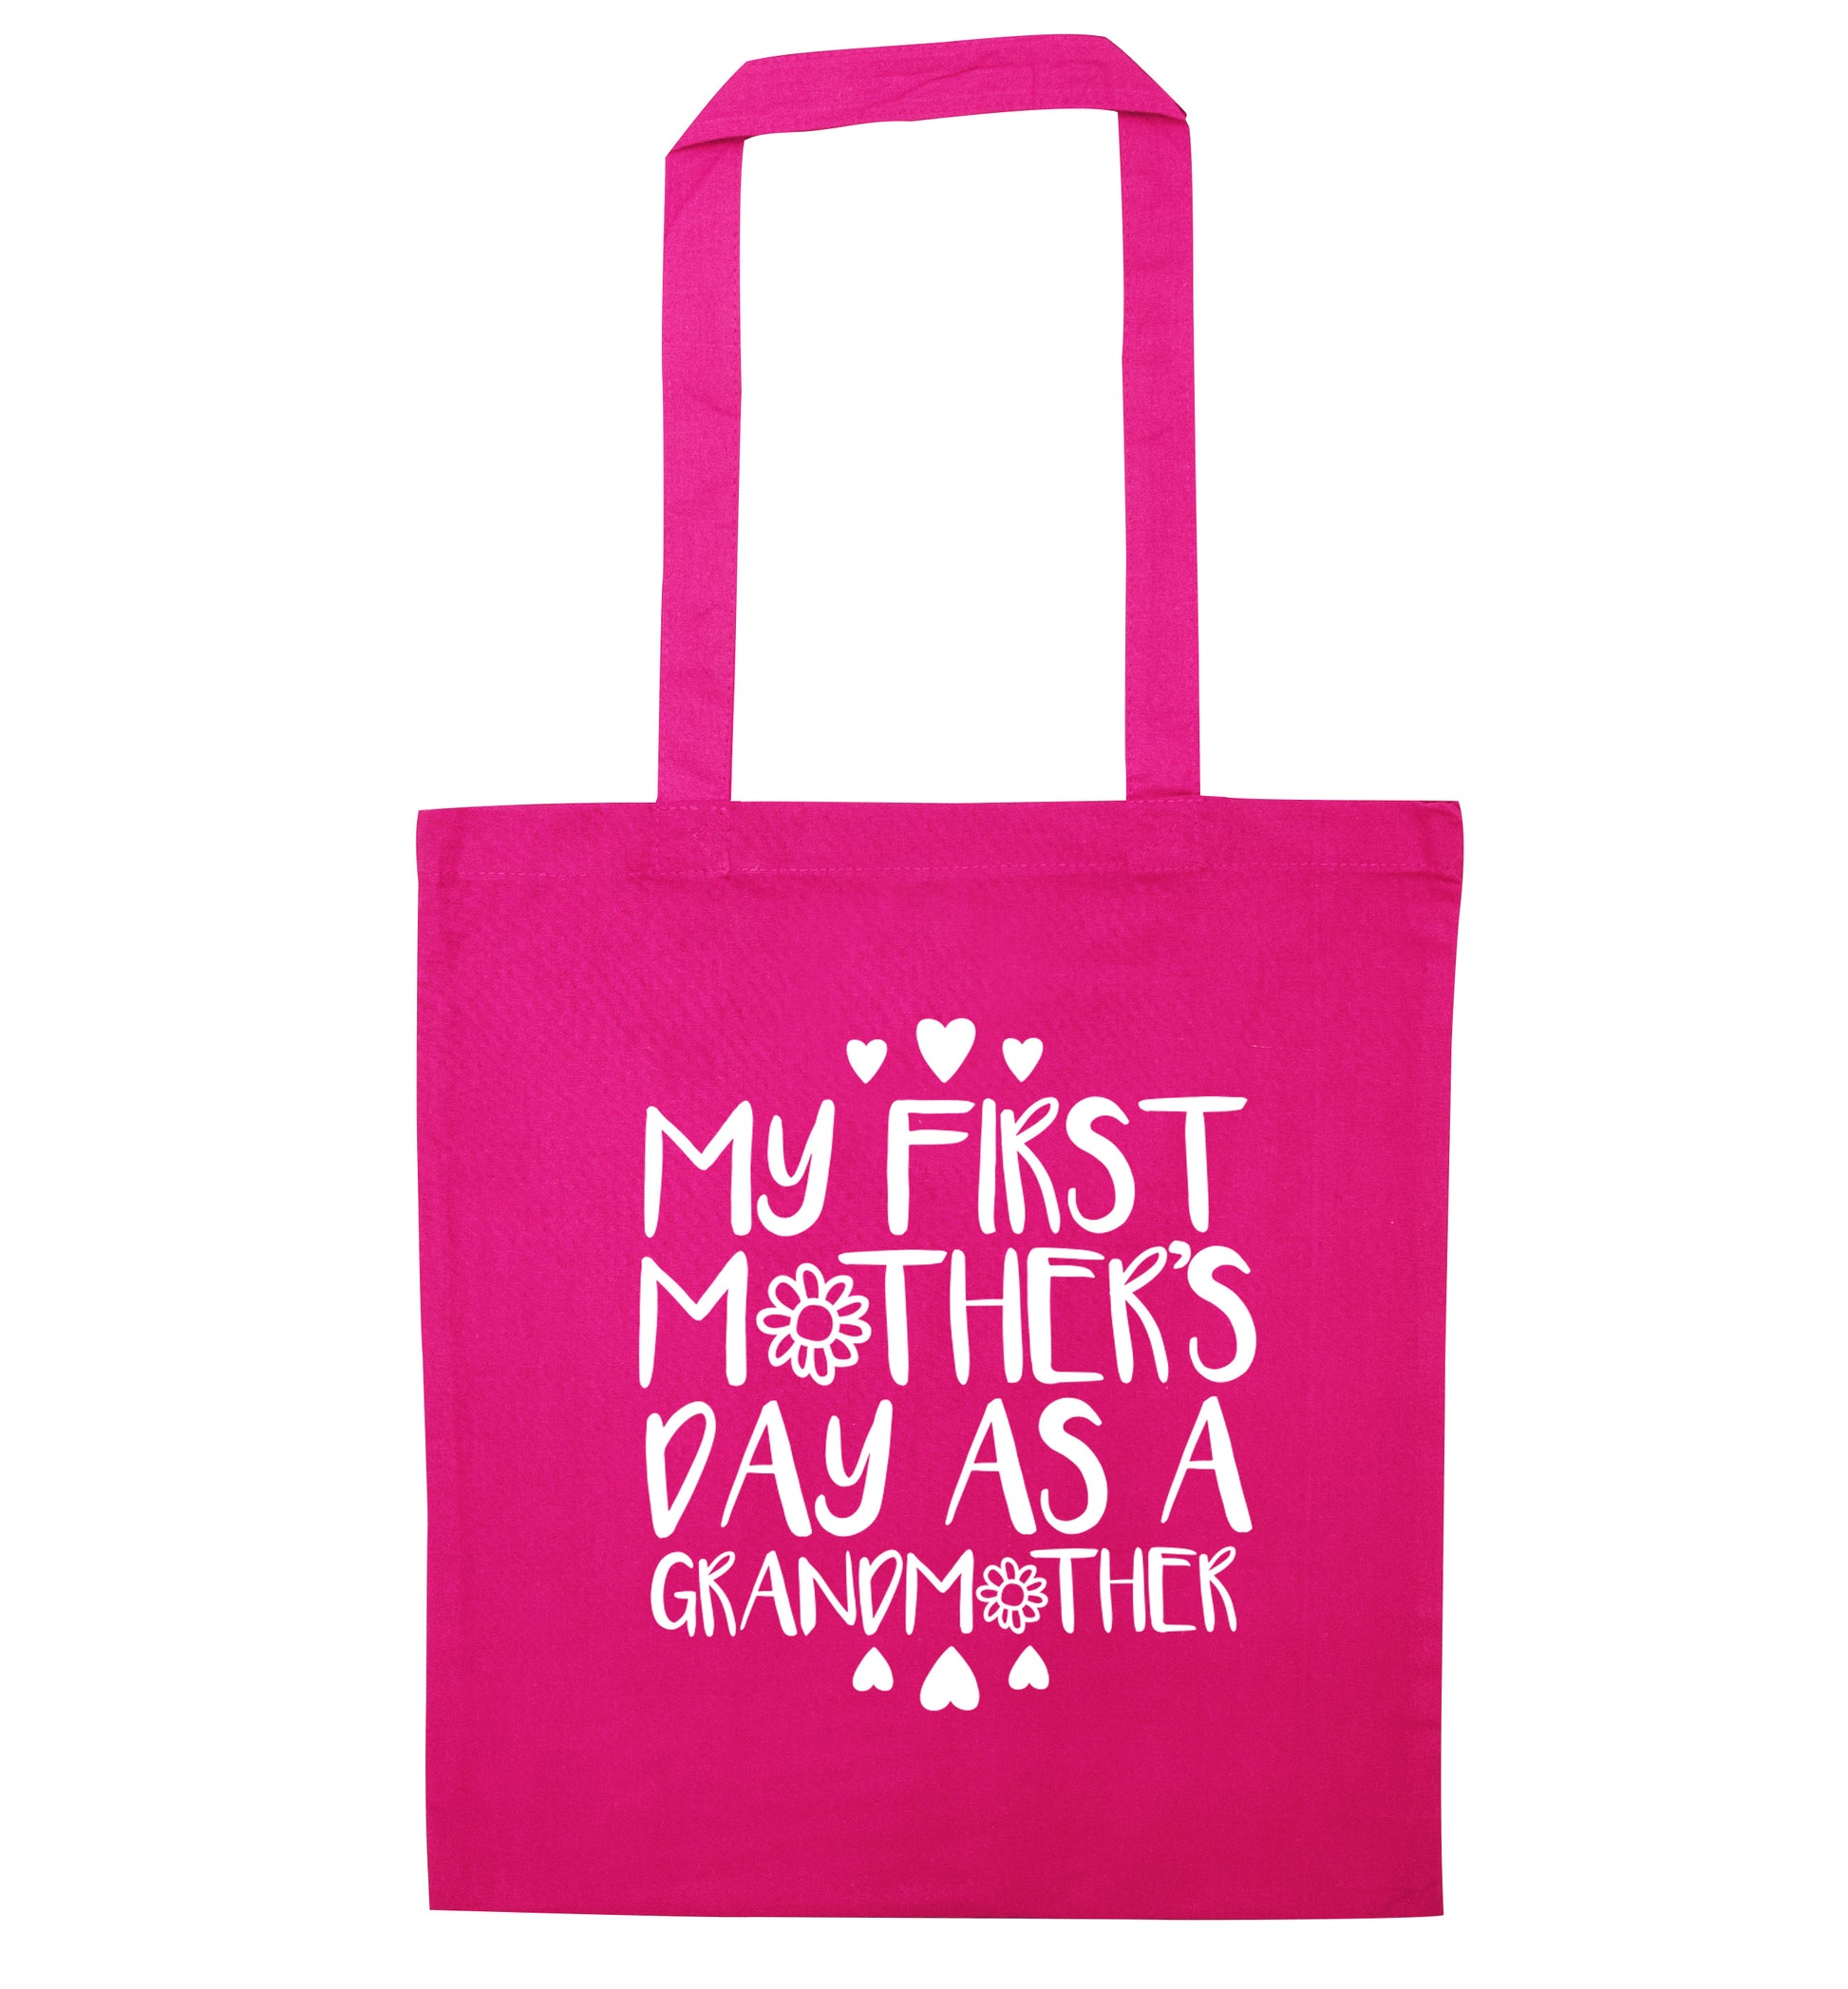 My first mother's day as a grandmother pink tote bag